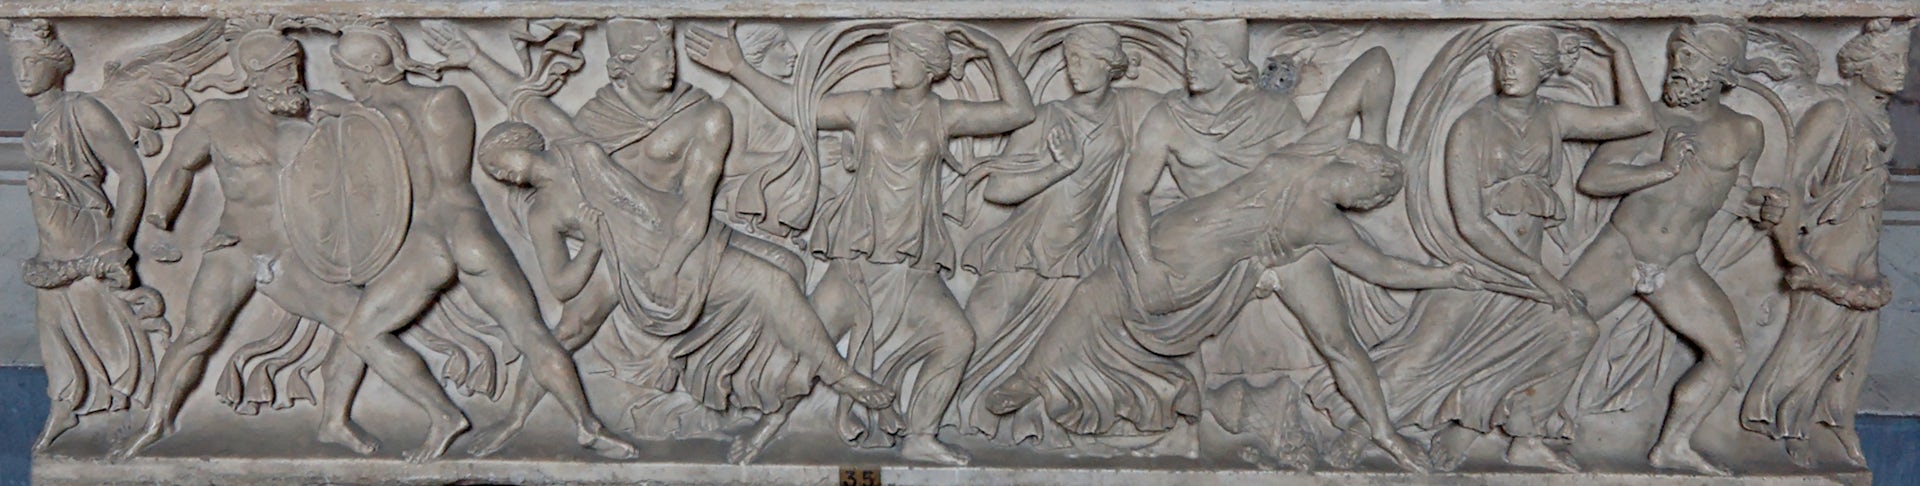 Roman sarcophagus showing the rape of the Leucippides by the Dioscuri